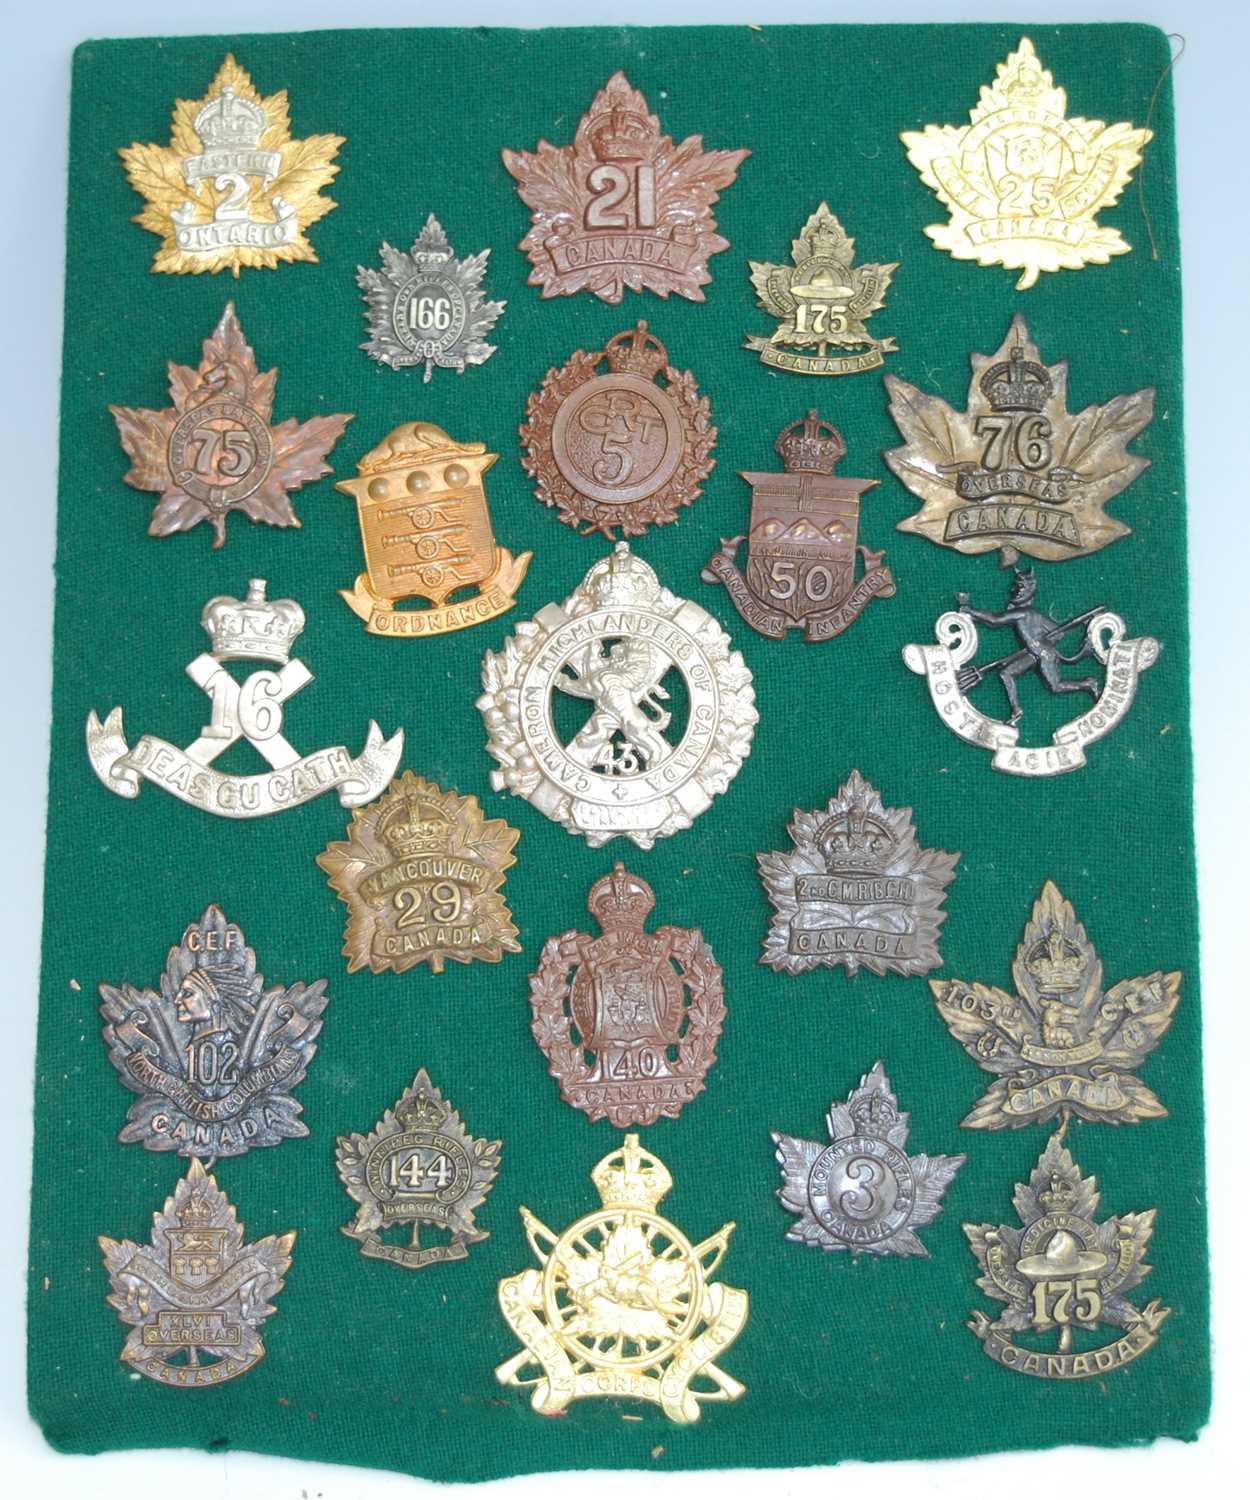 A collection of Canadian Regiment cap badges and insignia to include 48th Highlanders 15th